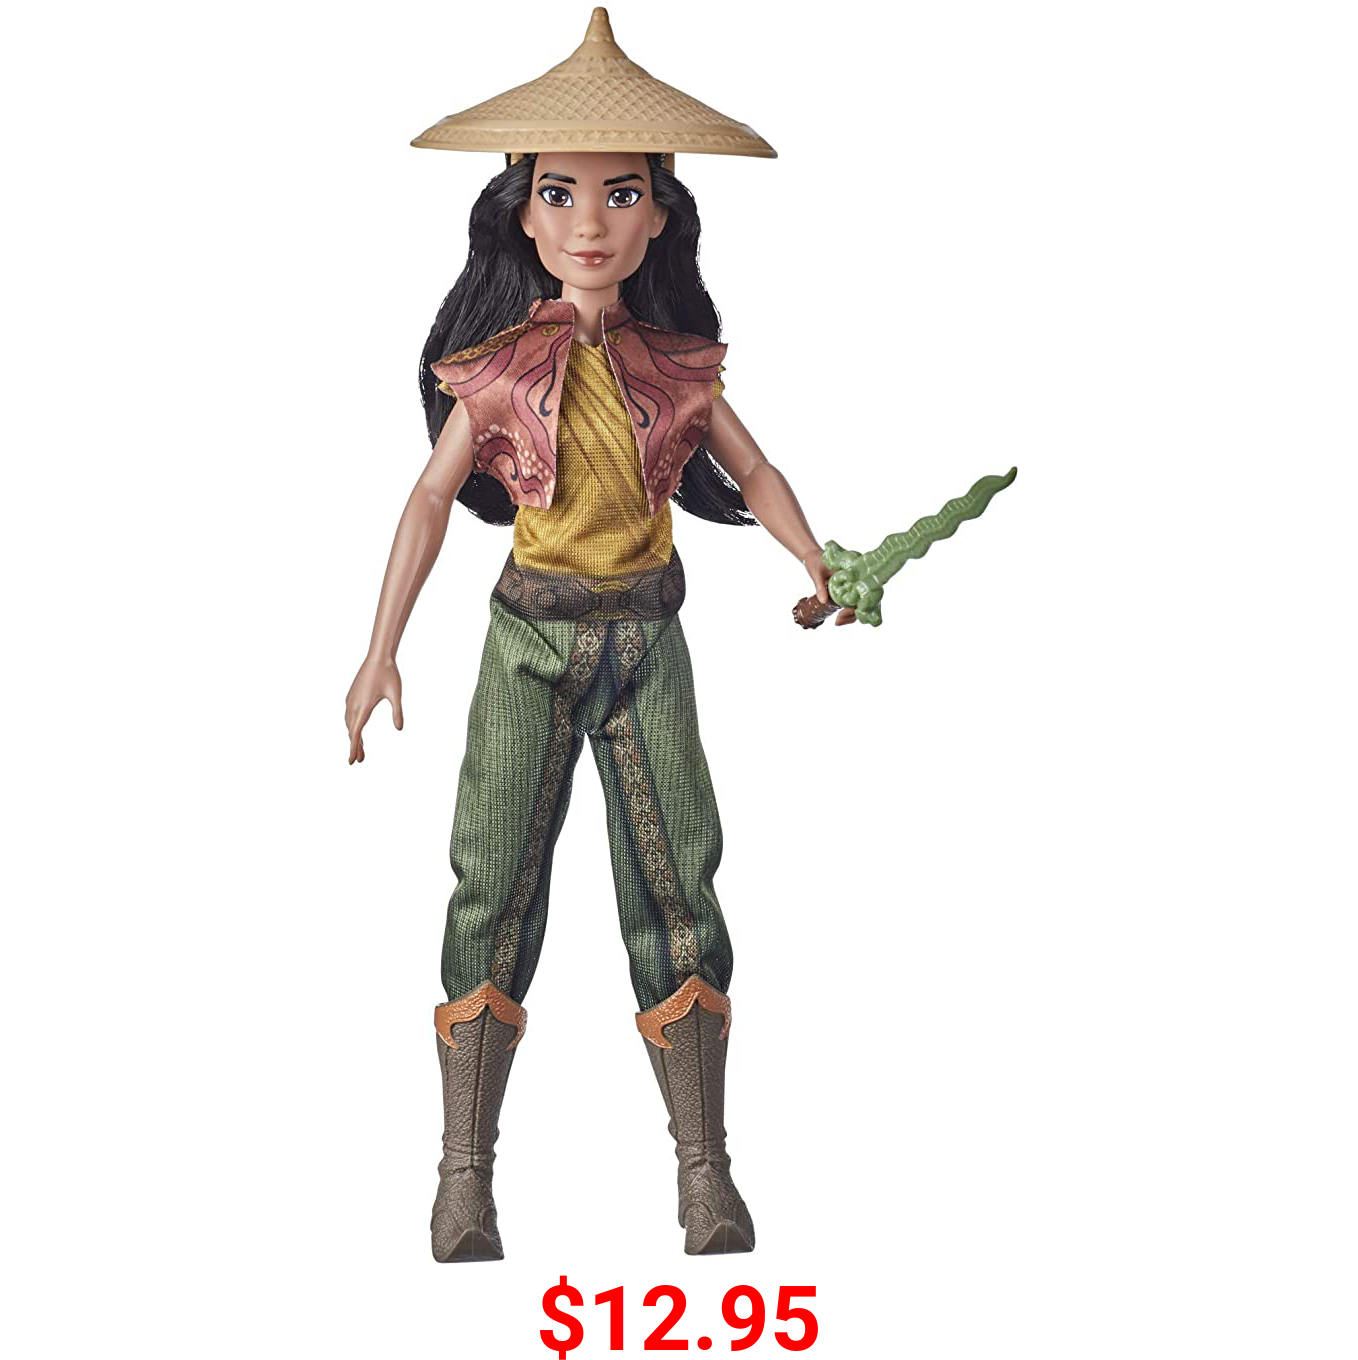 Disney Raya and The Last Dragon Raya's Adventure Styles, Fashion Doll with Clothes, Shoes, and Sword Accessory, Toy for Kids 3 Years and Up